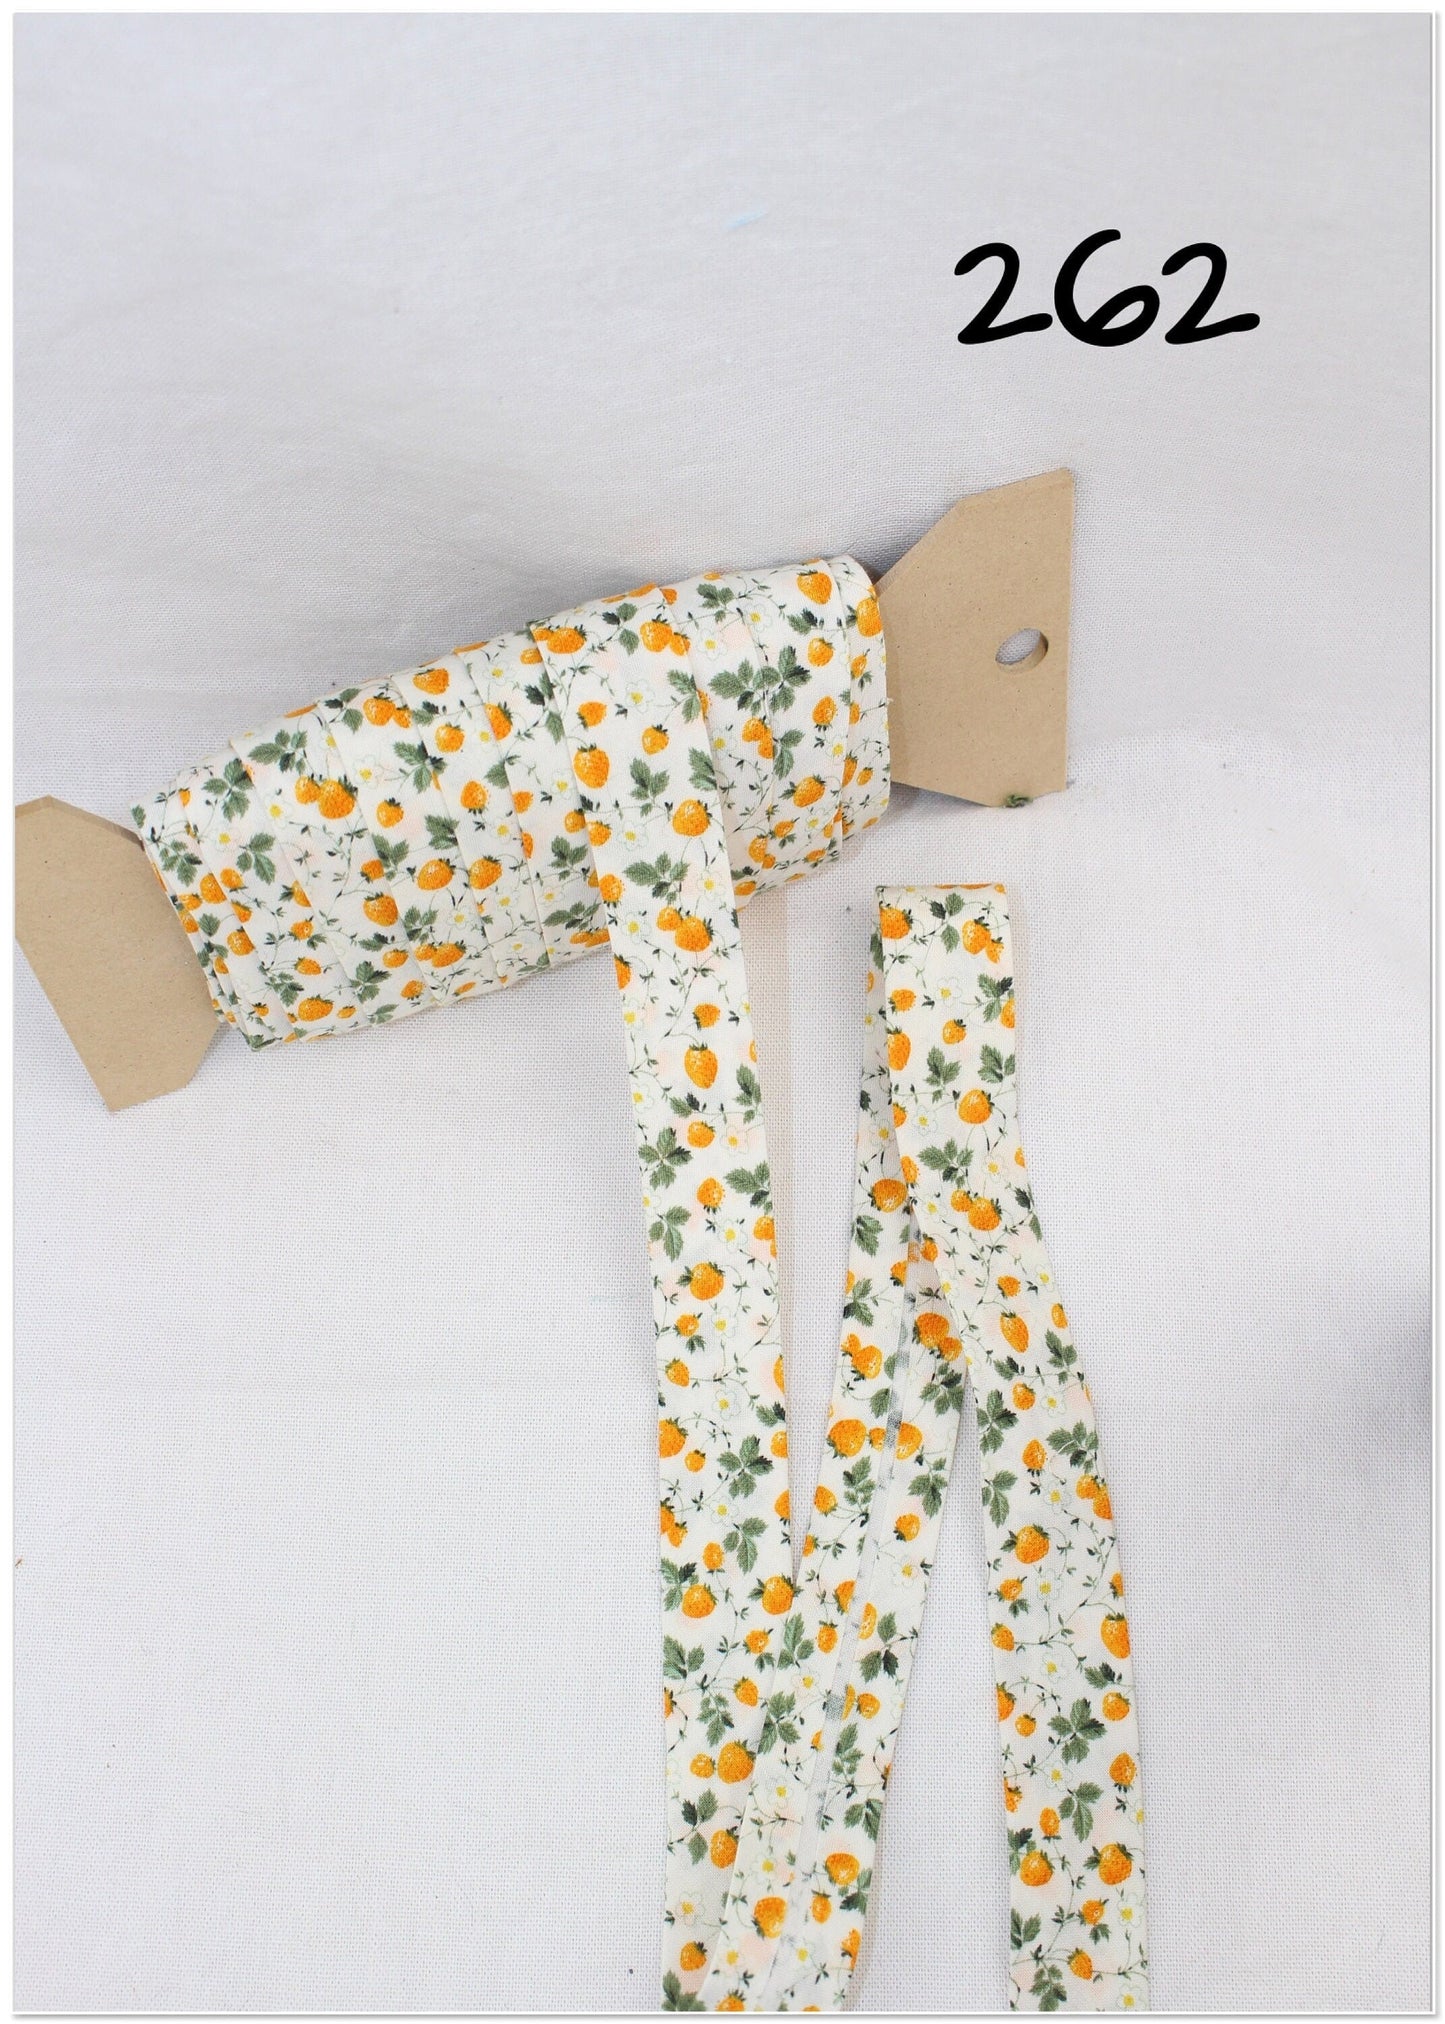 Bias Binding (Tape) 25mm, Cotton, Single Fold, strawberries, bones. Fusible iron on available.